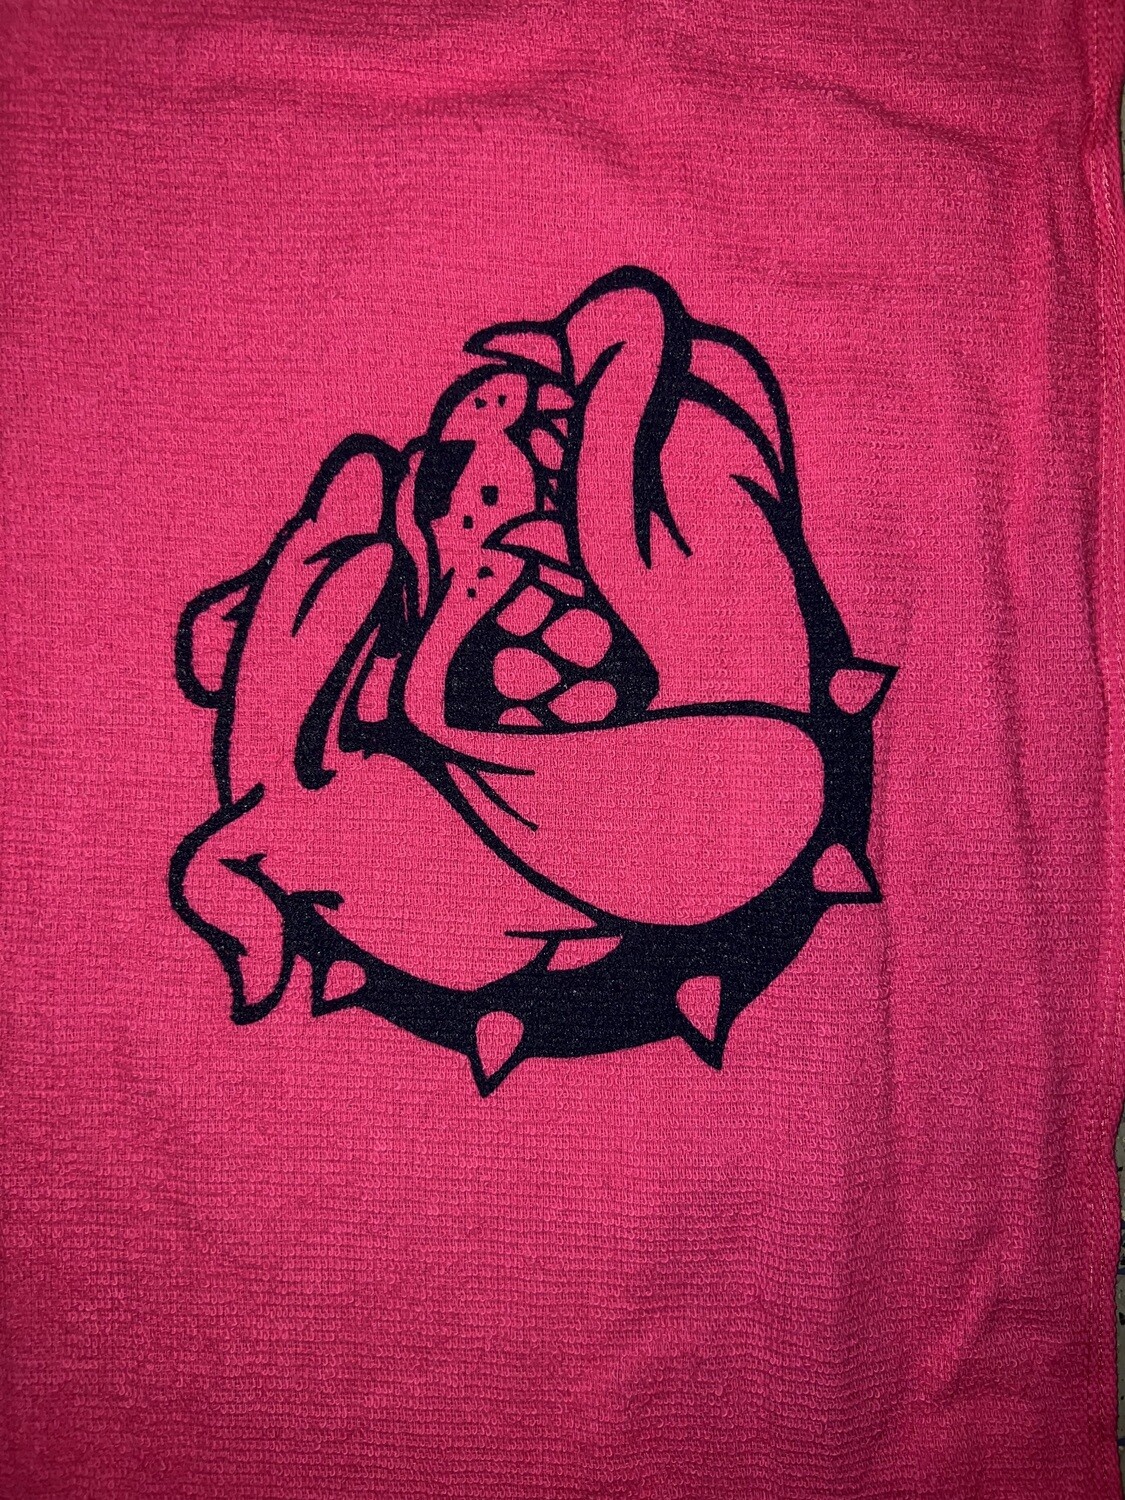 RALLY TOWEL - PINK OUT